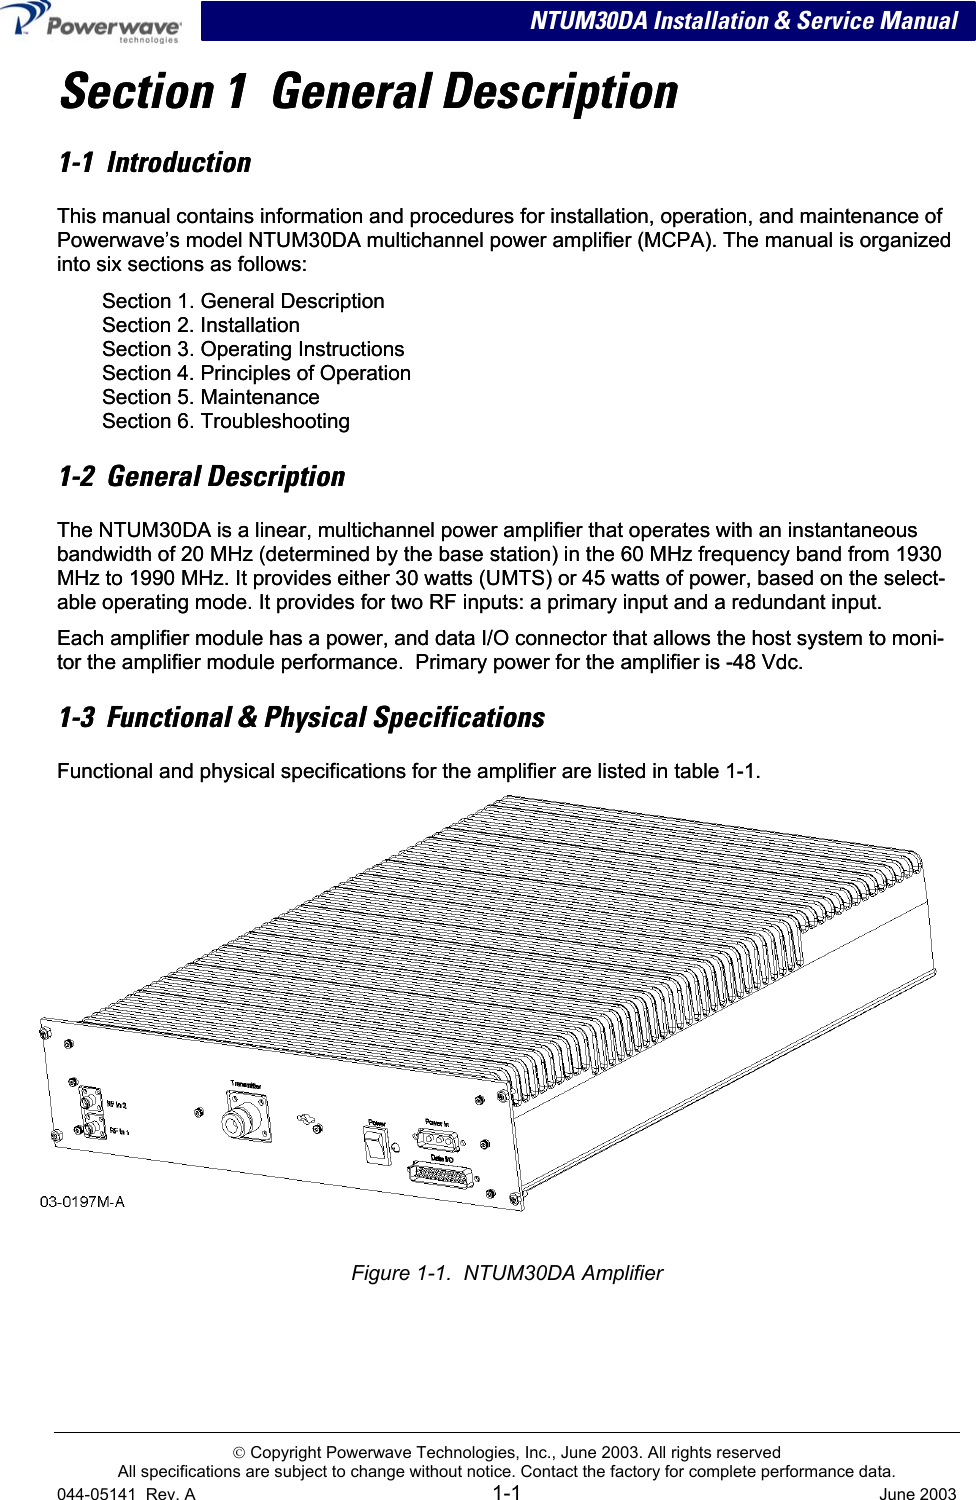   NTUM30DA Installation &amp; Service Manual Section 1  General Description Section 1  General Description 1-1  Introduction 1-1  Introduction This manual contains information and procedures for installation, operation, and maintenance of Powerwave’s model NTUM30DA multichannel power amplifier (MCPA). The manual is organized into six sections as follows: This manual contains information and procedures for installation, operation, and maintenance of Powerwave’s model NTUM30DA multichannel power amplifier (MCPA). The manual is organized into six sections as follows: Section 1. General Description Section 2. Installation Section 3. Operating Instructions Section 4. Principles of Operation Section 5. Maintenance Section 6. Troubleshooting Section 1. General Description Section 2. Installation Section 3. Operating Instructions Section 4. Principles of Operation Section 5. Maintenance Section 6. Troubleshooting 1-2  General Description 1-2  General Description The NTUM30DA is a linear, multichannel power amplifier that operates with an instantaneous bandwidth of 20 MHz (determined by the base station) in the 60 MHz frequency band from 1930 MHz to 1990 MHz. It provides either 30 watts (UMTS) or 45 watts of power, based on the select-able operating mode. It provides for two RF inputs: a primary input and a redundant input. The NTUM30DA is a linear, multichannel power amplifier that operates with an instantaneous bandwidth of 20 MHz (determined by the base station) in the 60 MHz frequency band from 1930 MHz to 1990 MHz. It provides either 30 watts (UMTS) or 45 watts of power, based on the select-able operating mode. It provides for two RF inputs: a primary input and a redundant input. Each amplifier module has a power, and data I/O connector that allows the host system to moni-tor the amplifier module performance.  Primary power for the amplifier is -48 Vdc.  Each amplifier module has a power, and data I/O connector that allows the host system to moni-tor the amplifier module performance.  Primary power for the amplifier is -48 Vdc.  1-3  Functional &amp; Physical Specifications 1-3  Functional &amp; Physical Specifications Functional and physical specifications for the amplifier are listed in table 1-1. Functional and physical specifications for the amplifier are listed in table 1-1.   Figure 1-1.  NTUM30DA Amplifier   Copyright Powerwave Technologies, Inc., June 2003. All rights reserved All specifications are subject to change without notice. Contact the factory for complete performance data.  044-05141  Rev. A 1-1  June 2003 